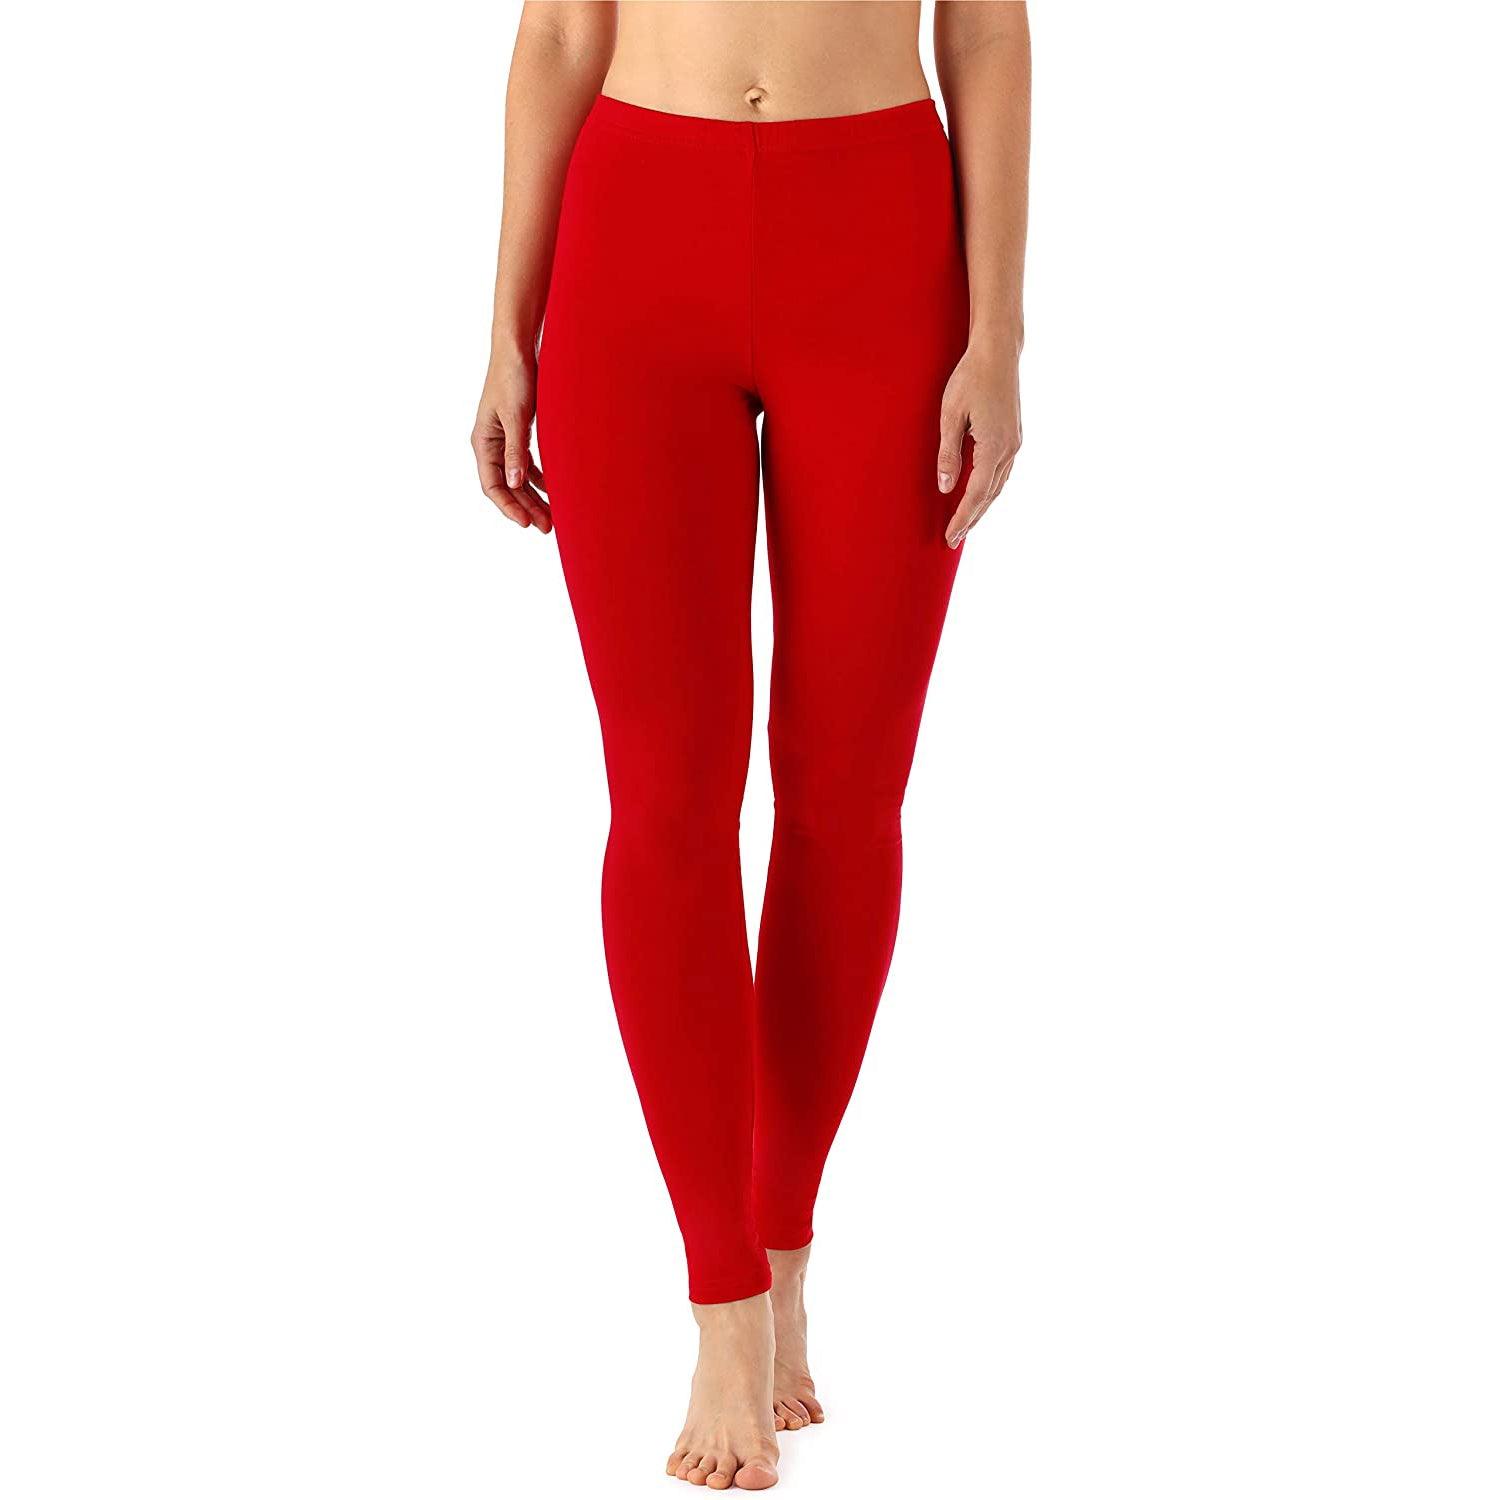 Zindwear Women's Cotton Soft Plain Summer Stretchy Ankle Length Leggings  (One Size, Red) –